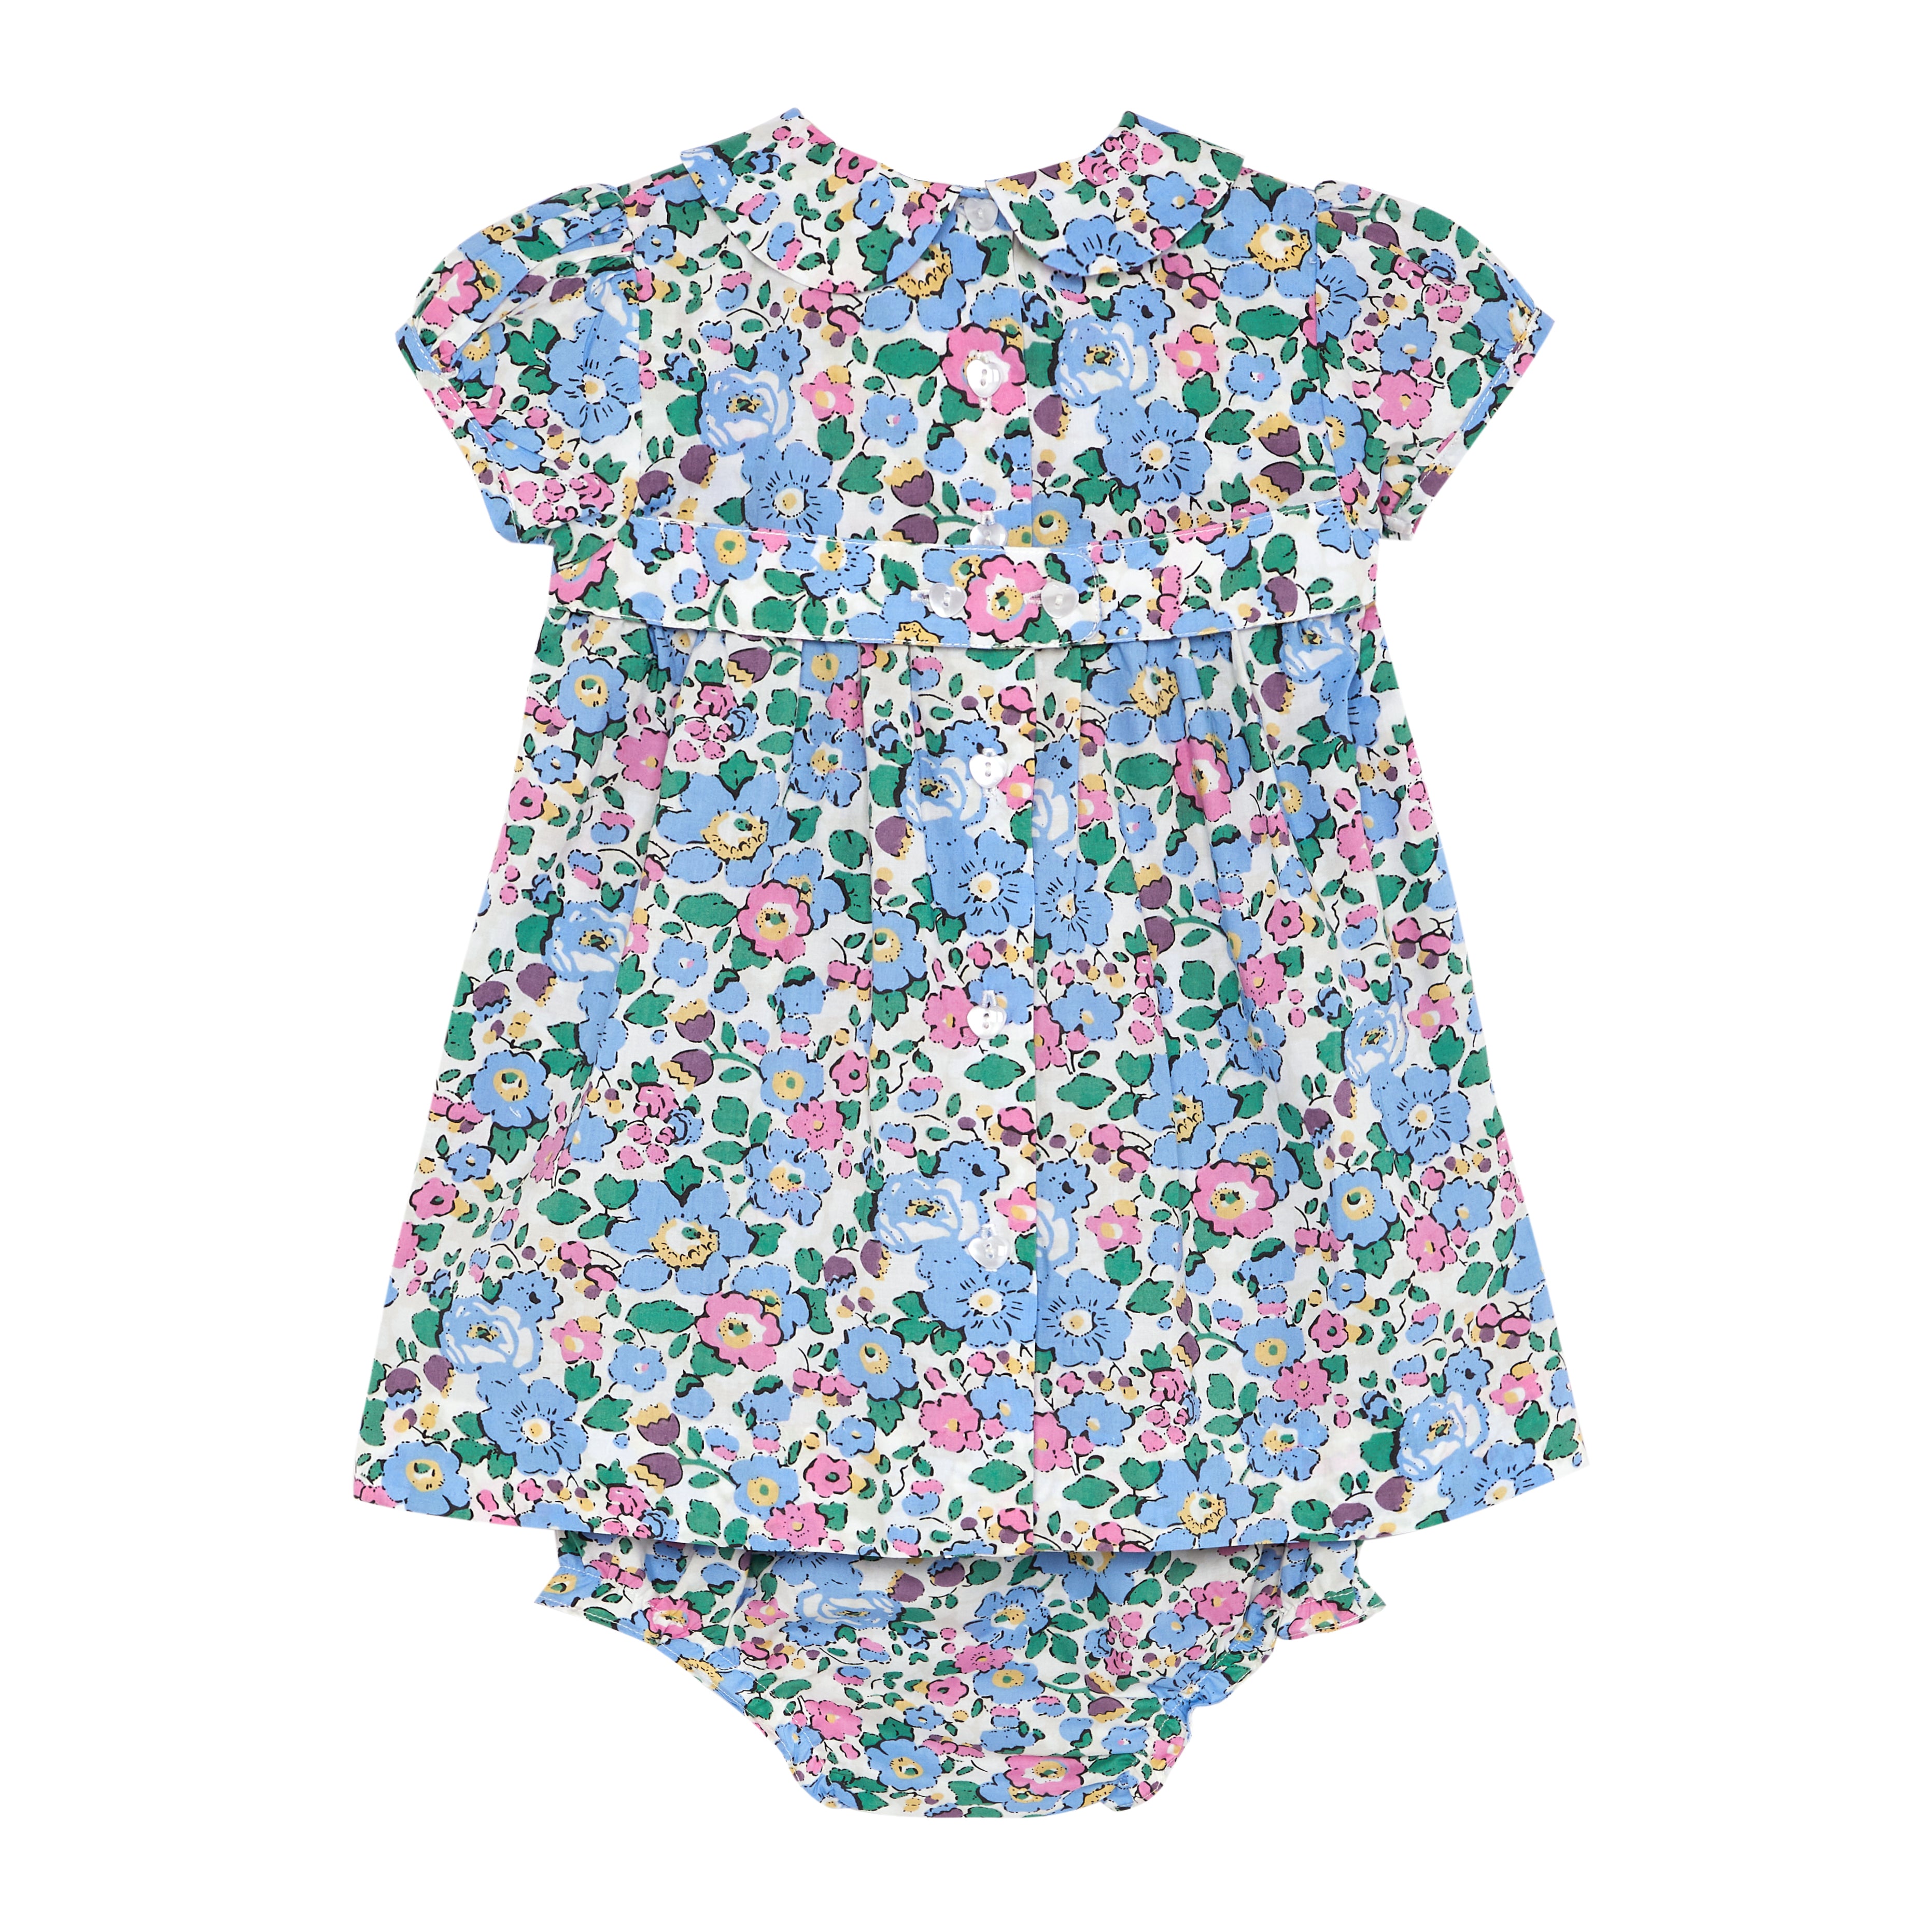 hand-smocked floral baby dress with bloomers, back